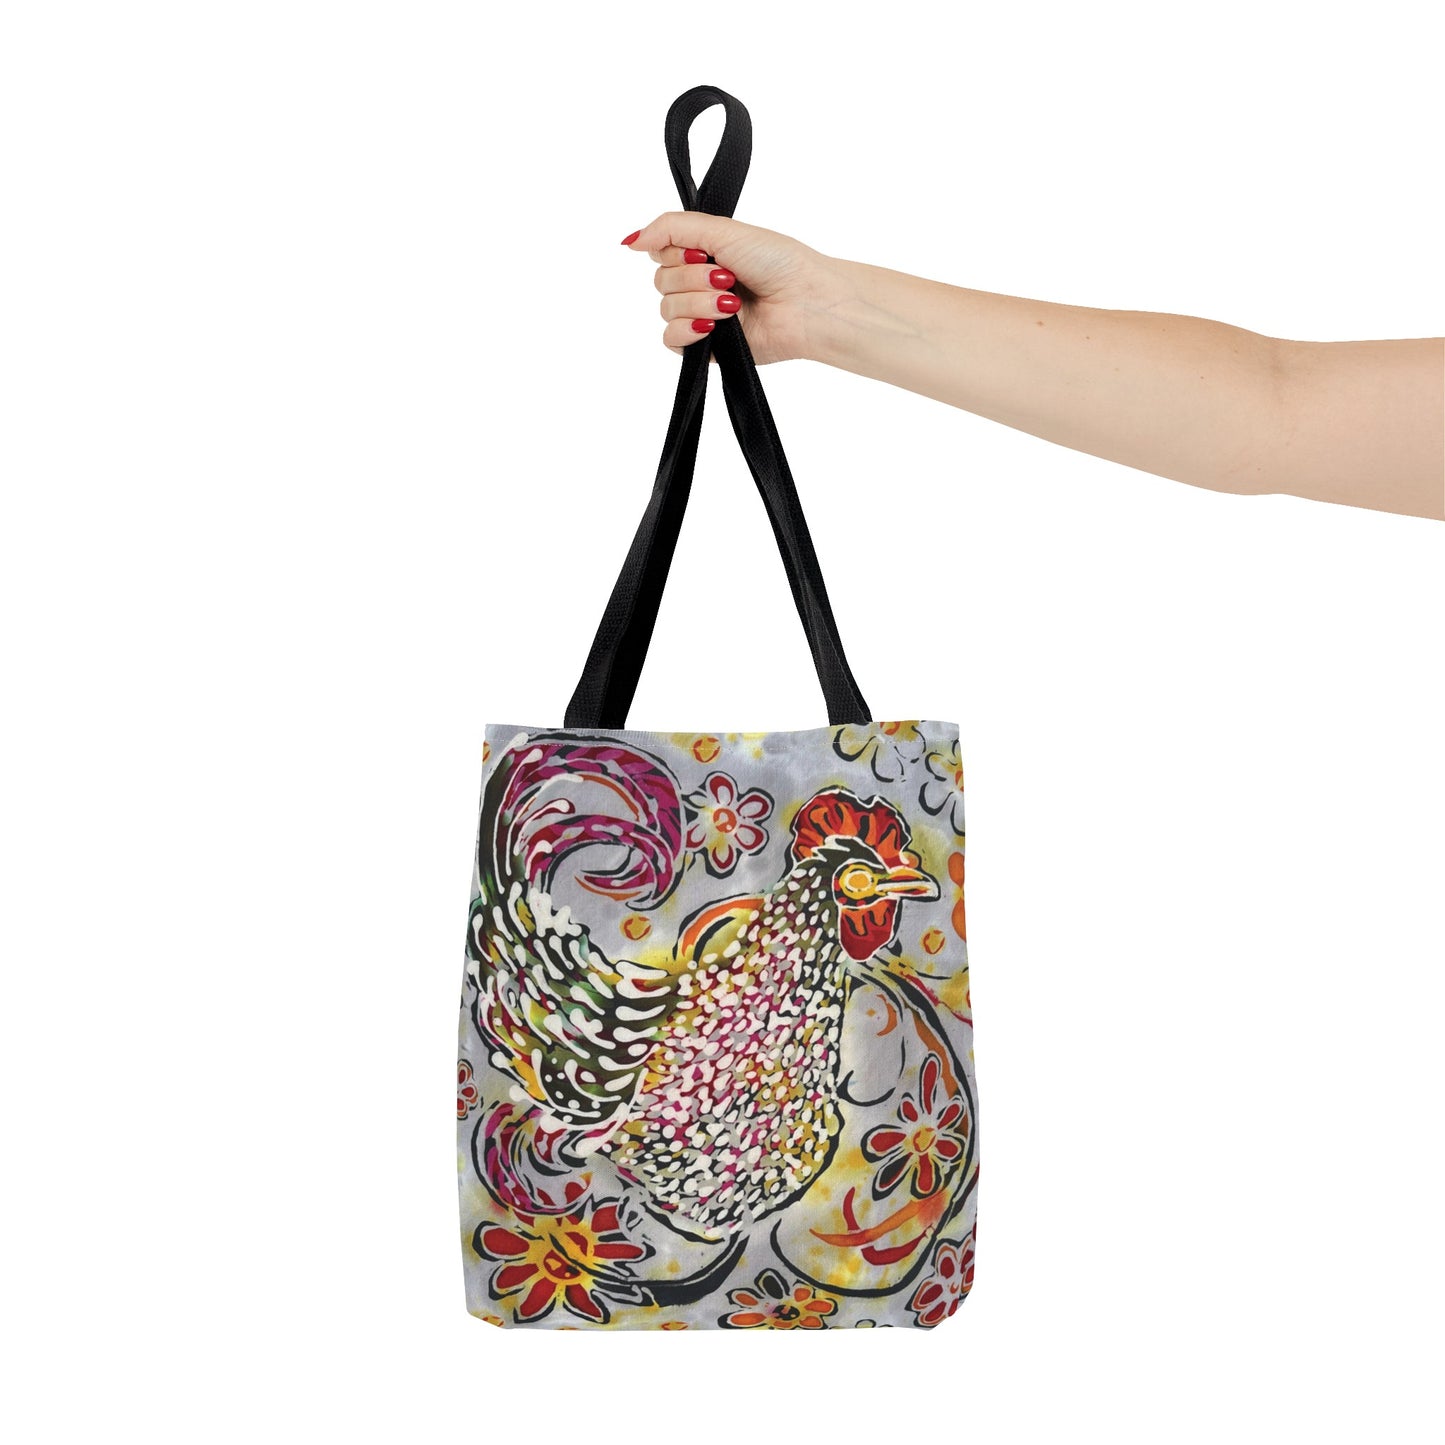 "Chicken with a Swirl" by Brigg Evans Design - Tote Bag (AOP)